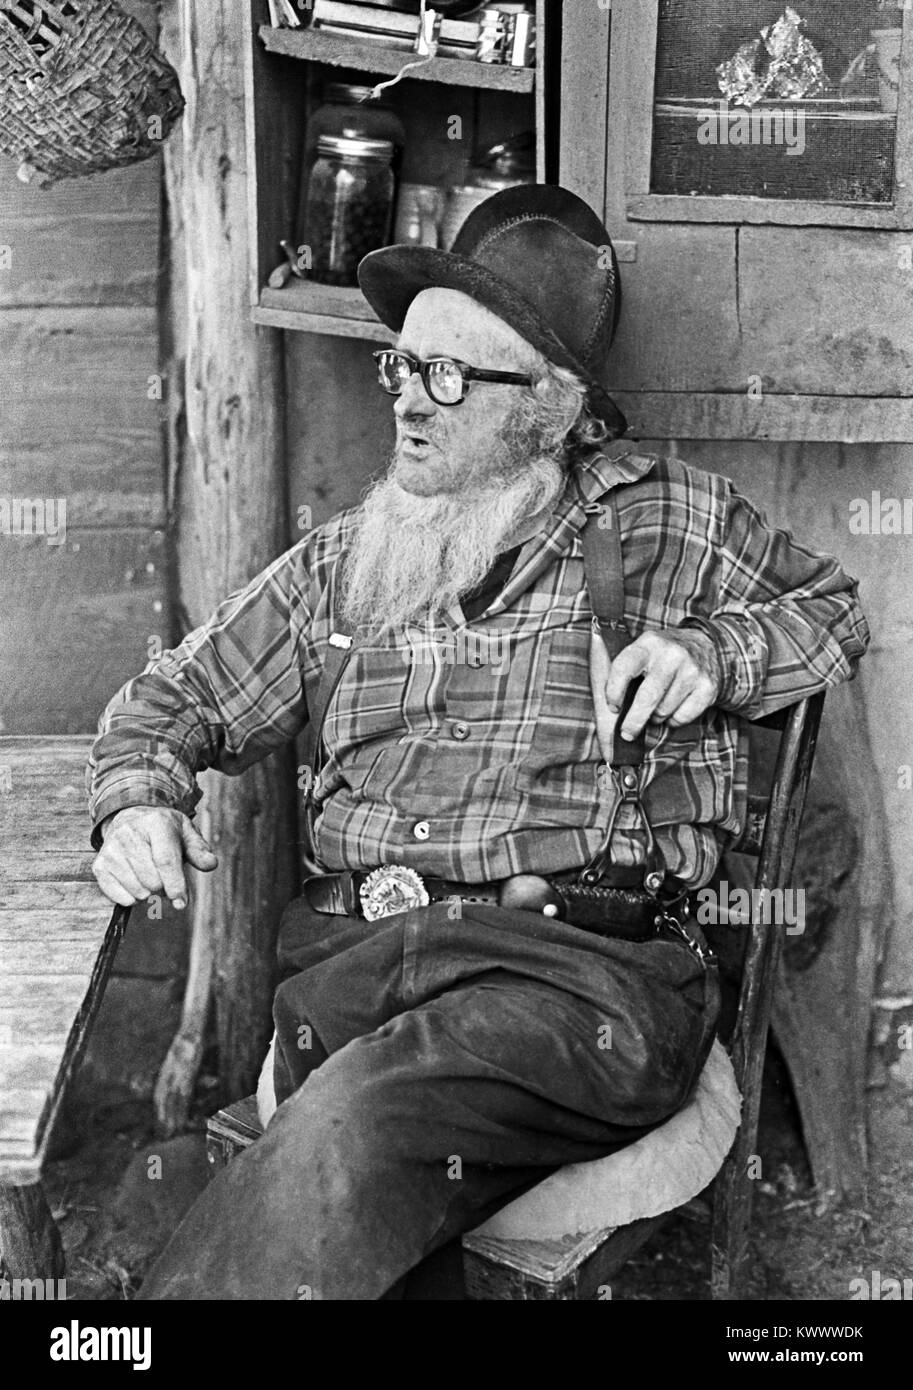 A portrait of Sylvan hart, better known as Buckskin Bill, at his isolated cabin along the Salmon River in Idaho. Stock Photo